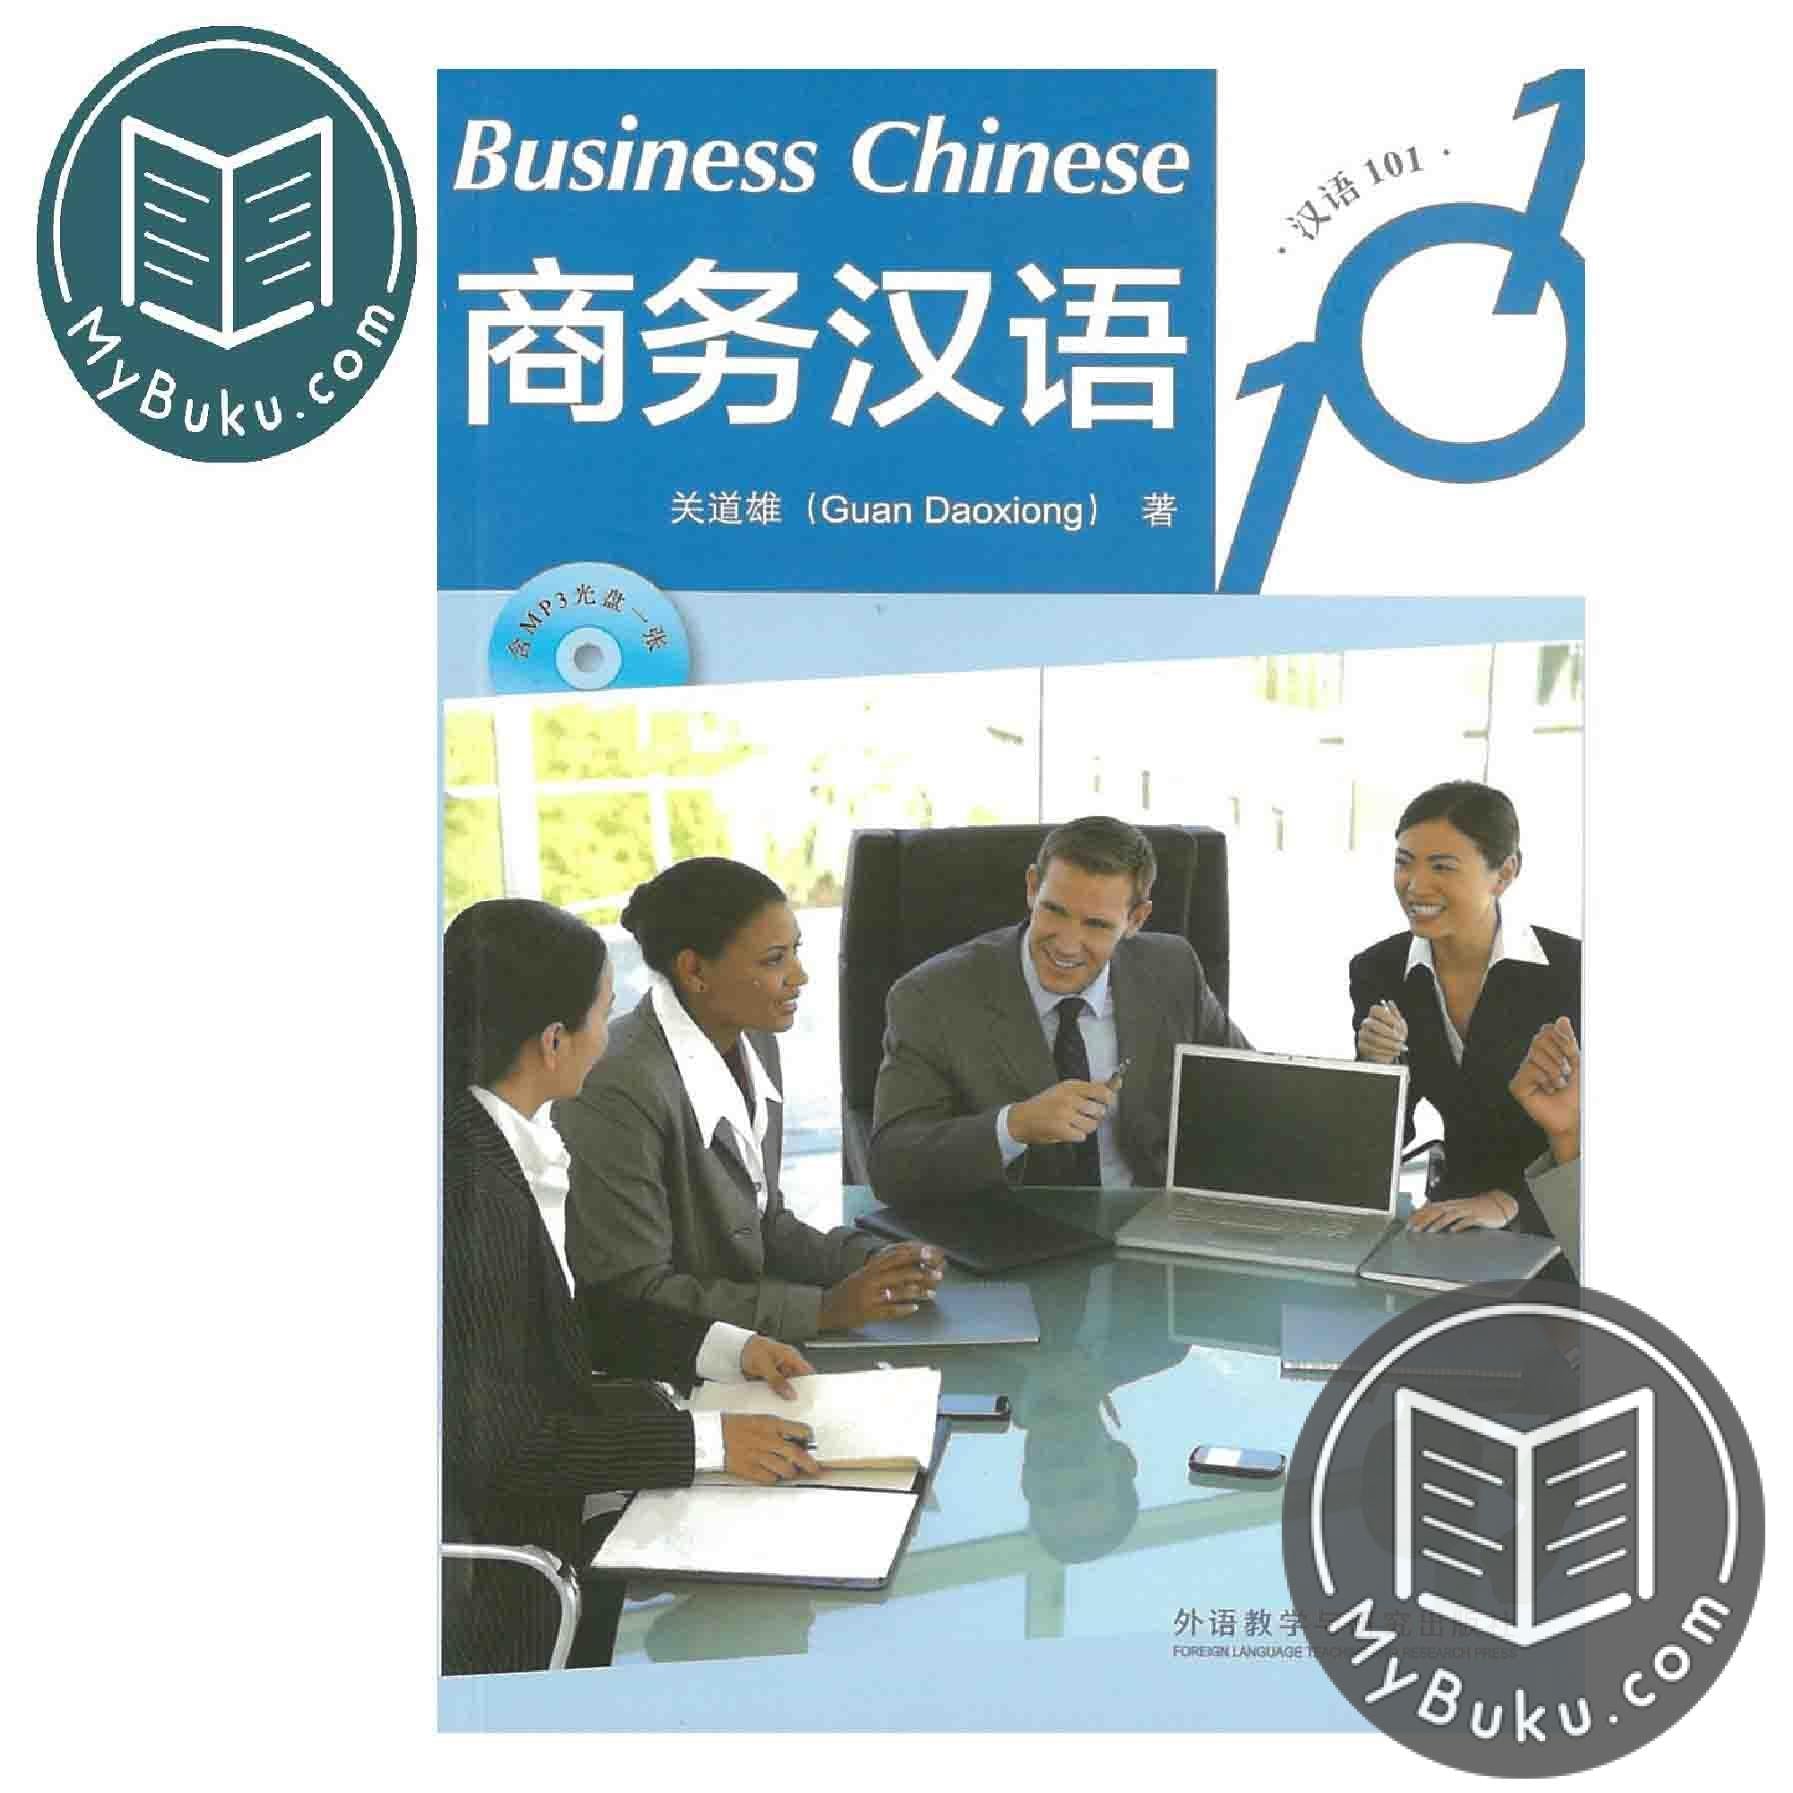 Business Chinese 101 - GUAN DAO XIONG - 9787513552967 - Foreign Language